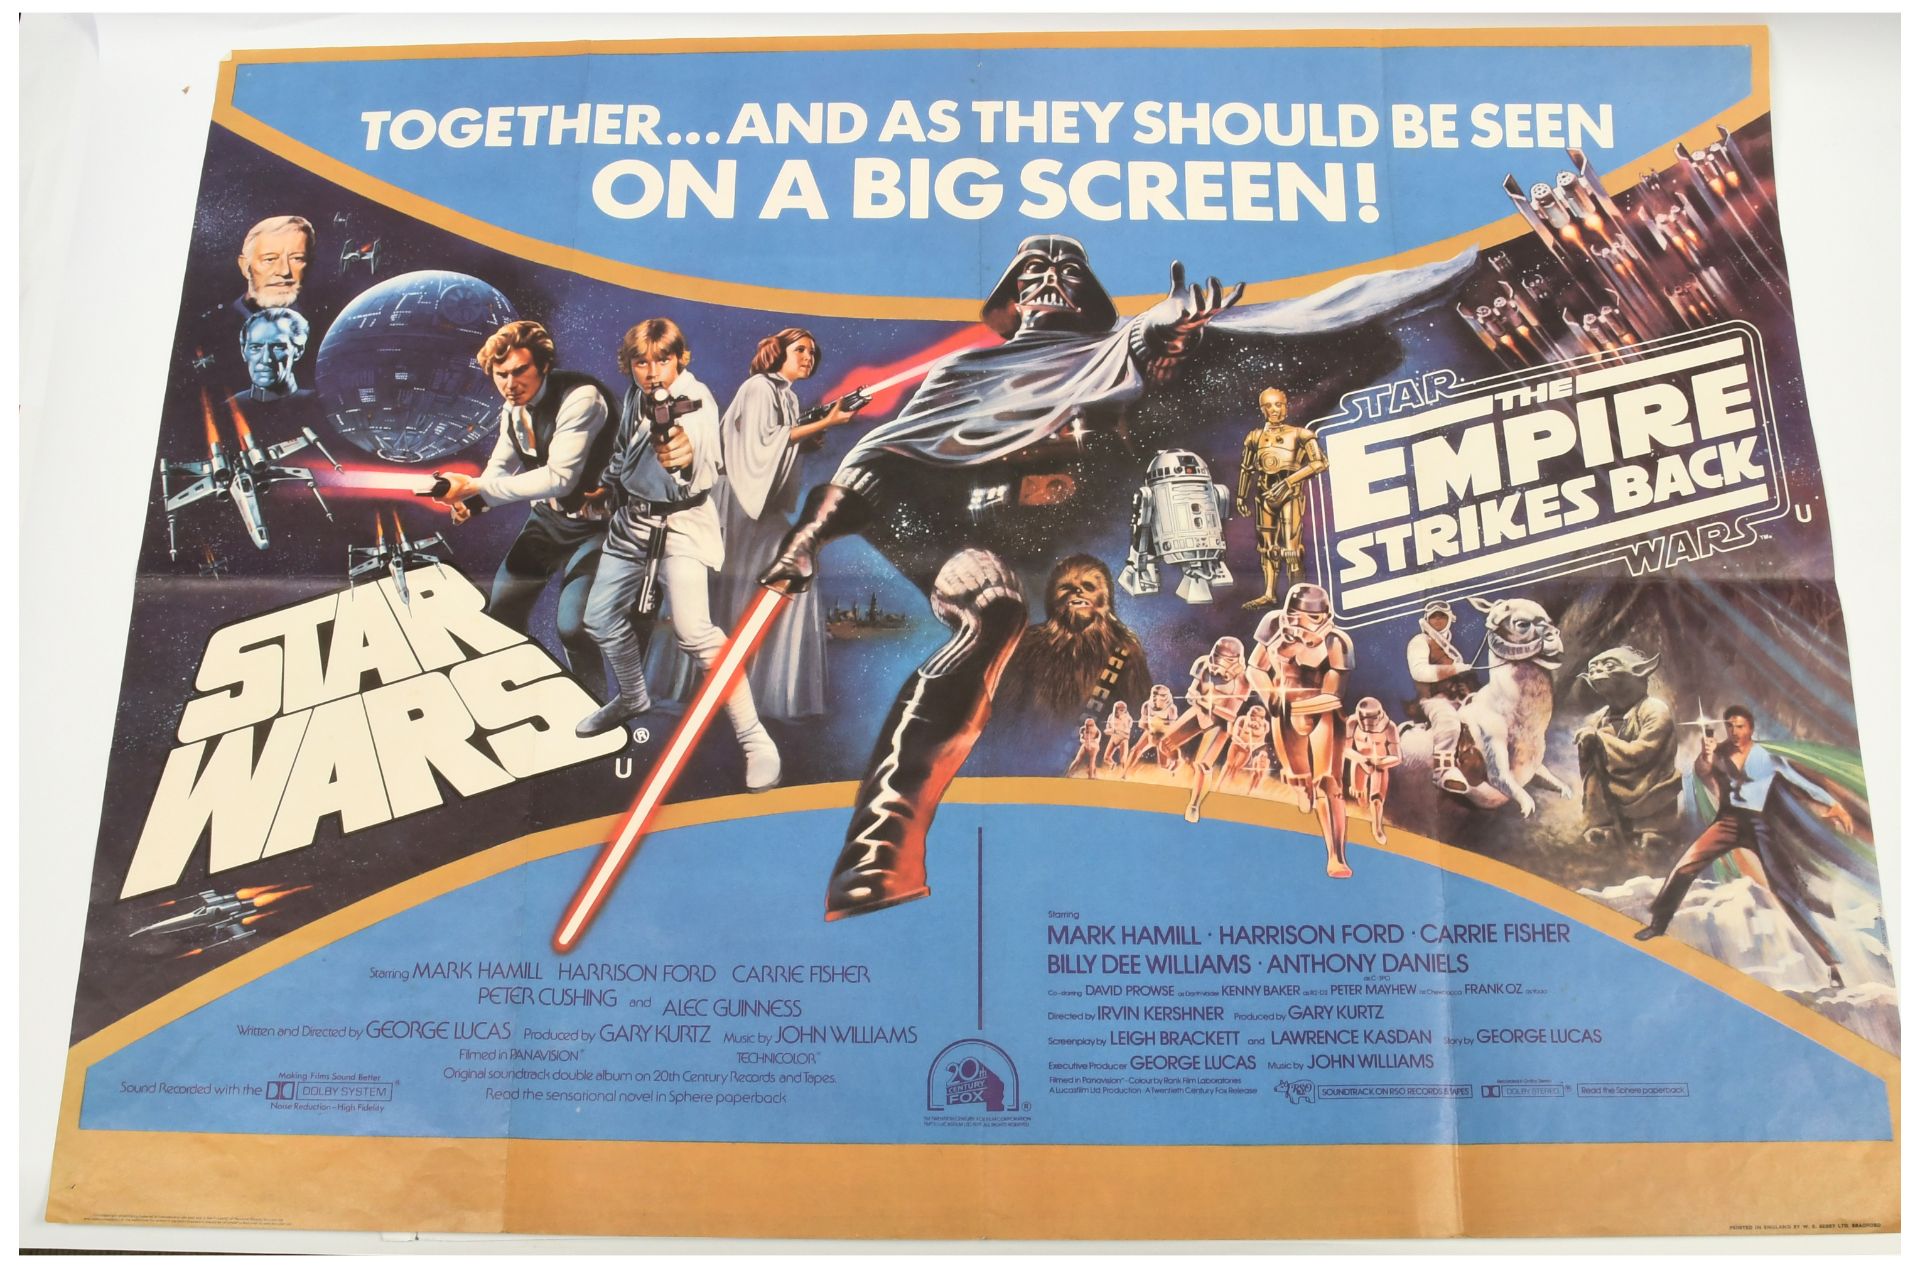 Star Wars Double Bill Star Wars and The Empire Strikes Back UK Quad Cinema Poster